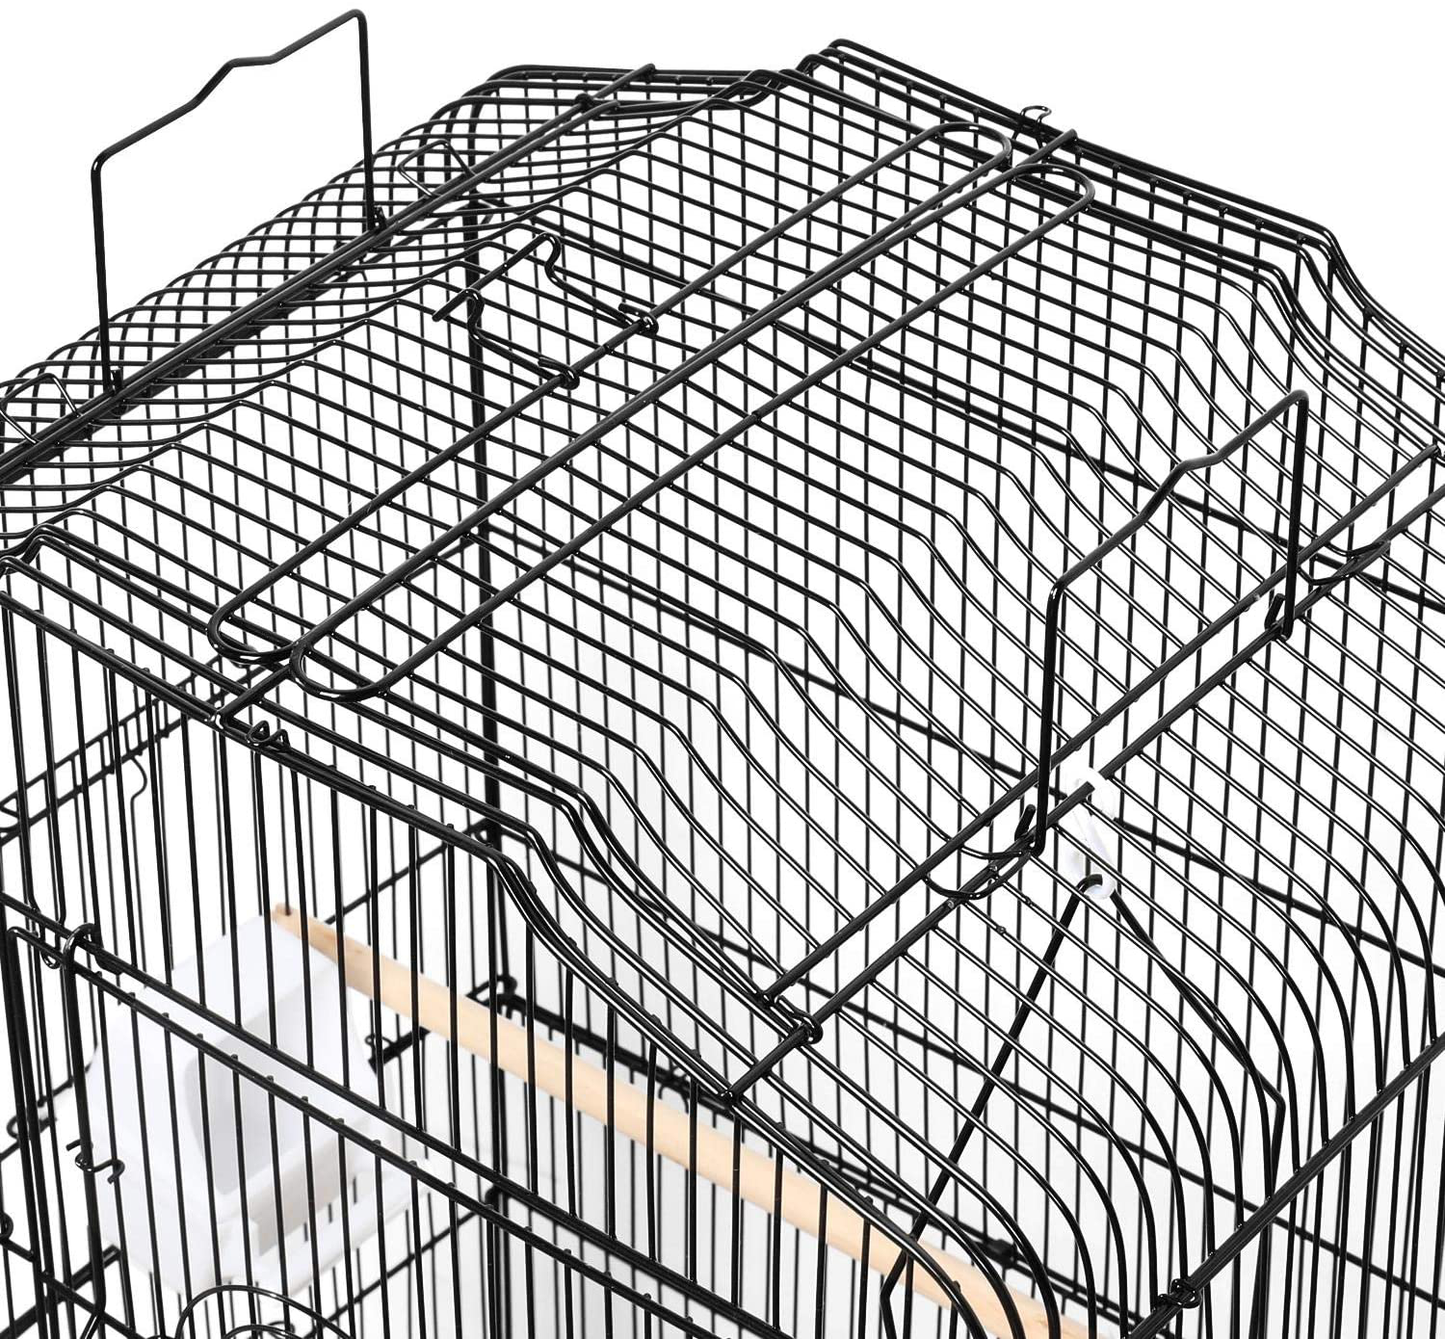 Topeakmart Open Play Top Bird Cage Parakeet Cage with Stand for Small Parrot Budgies Finches Canaries Lovebirds Animals & Pet Supplies > Pet Supplies > Bird Supplies > Bird Cages & Stands Topeakmart   